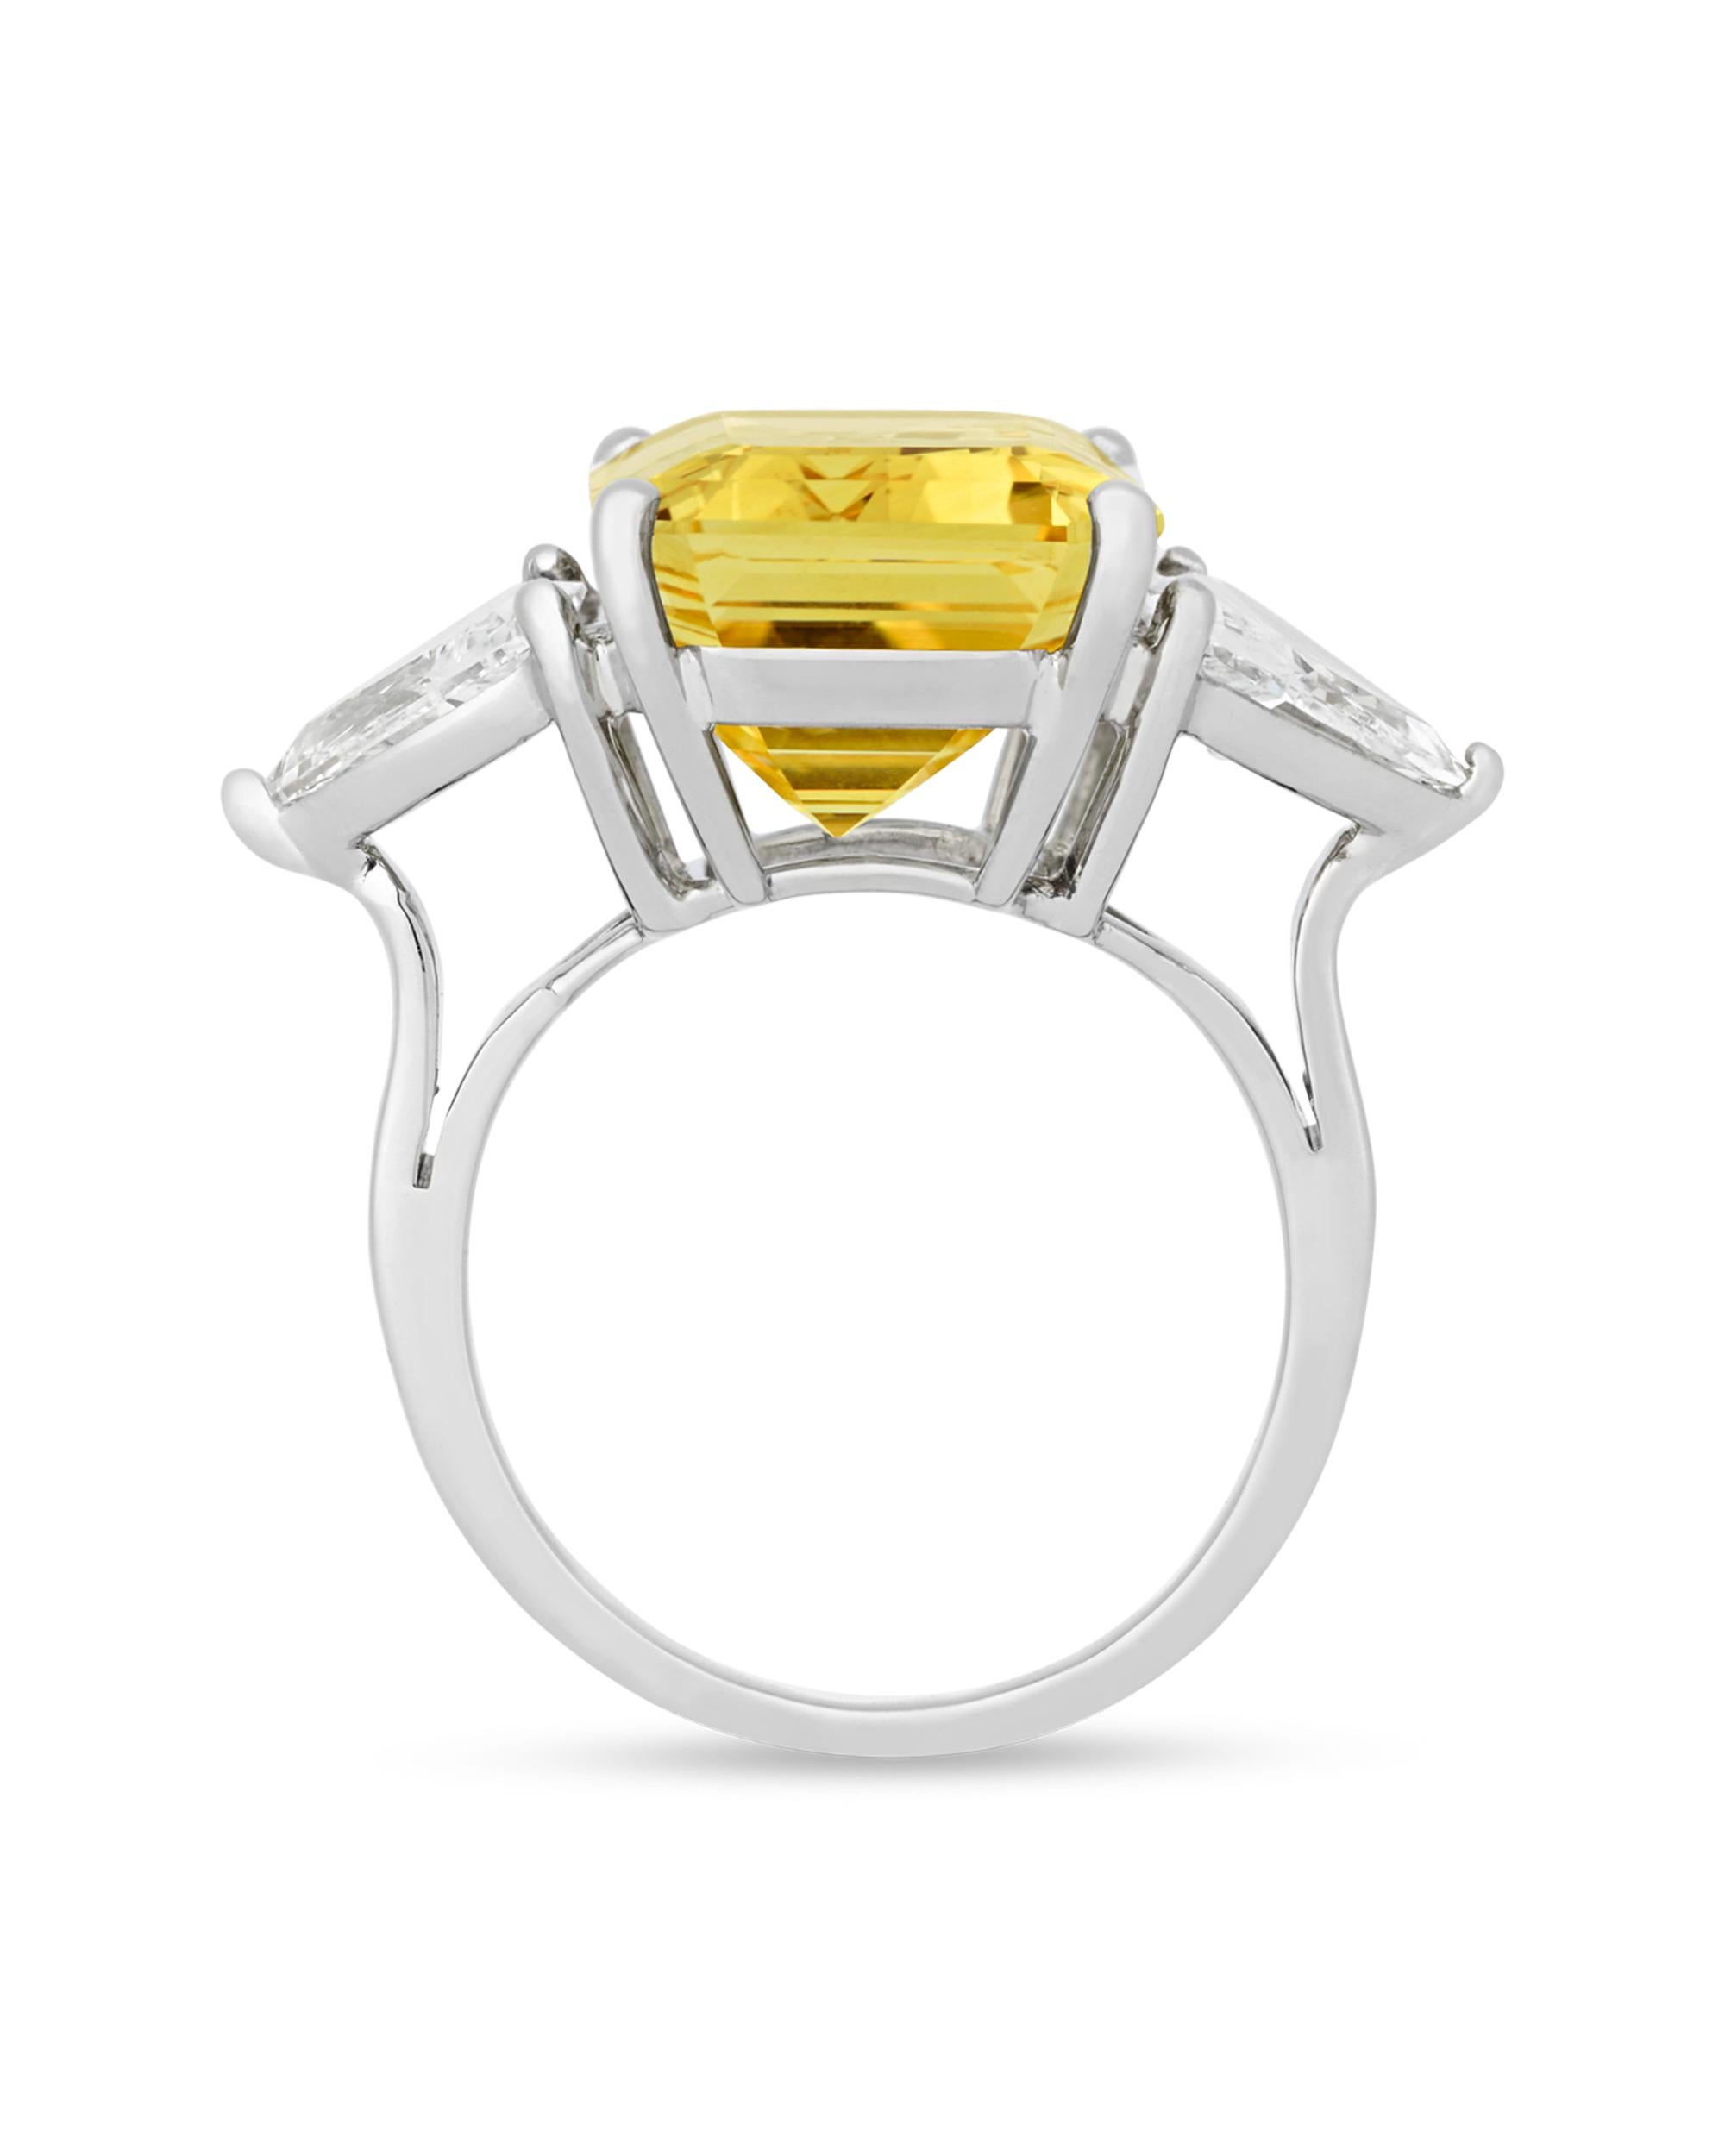 This classic ring features a fancy yellow Ceylon sapphire, one of the rarest of all fancy-colored sapphires. Weighing a monumental 17.82 carats, the rectangular emerald-cut jewel displays a superb yellow hue and is certified by the American